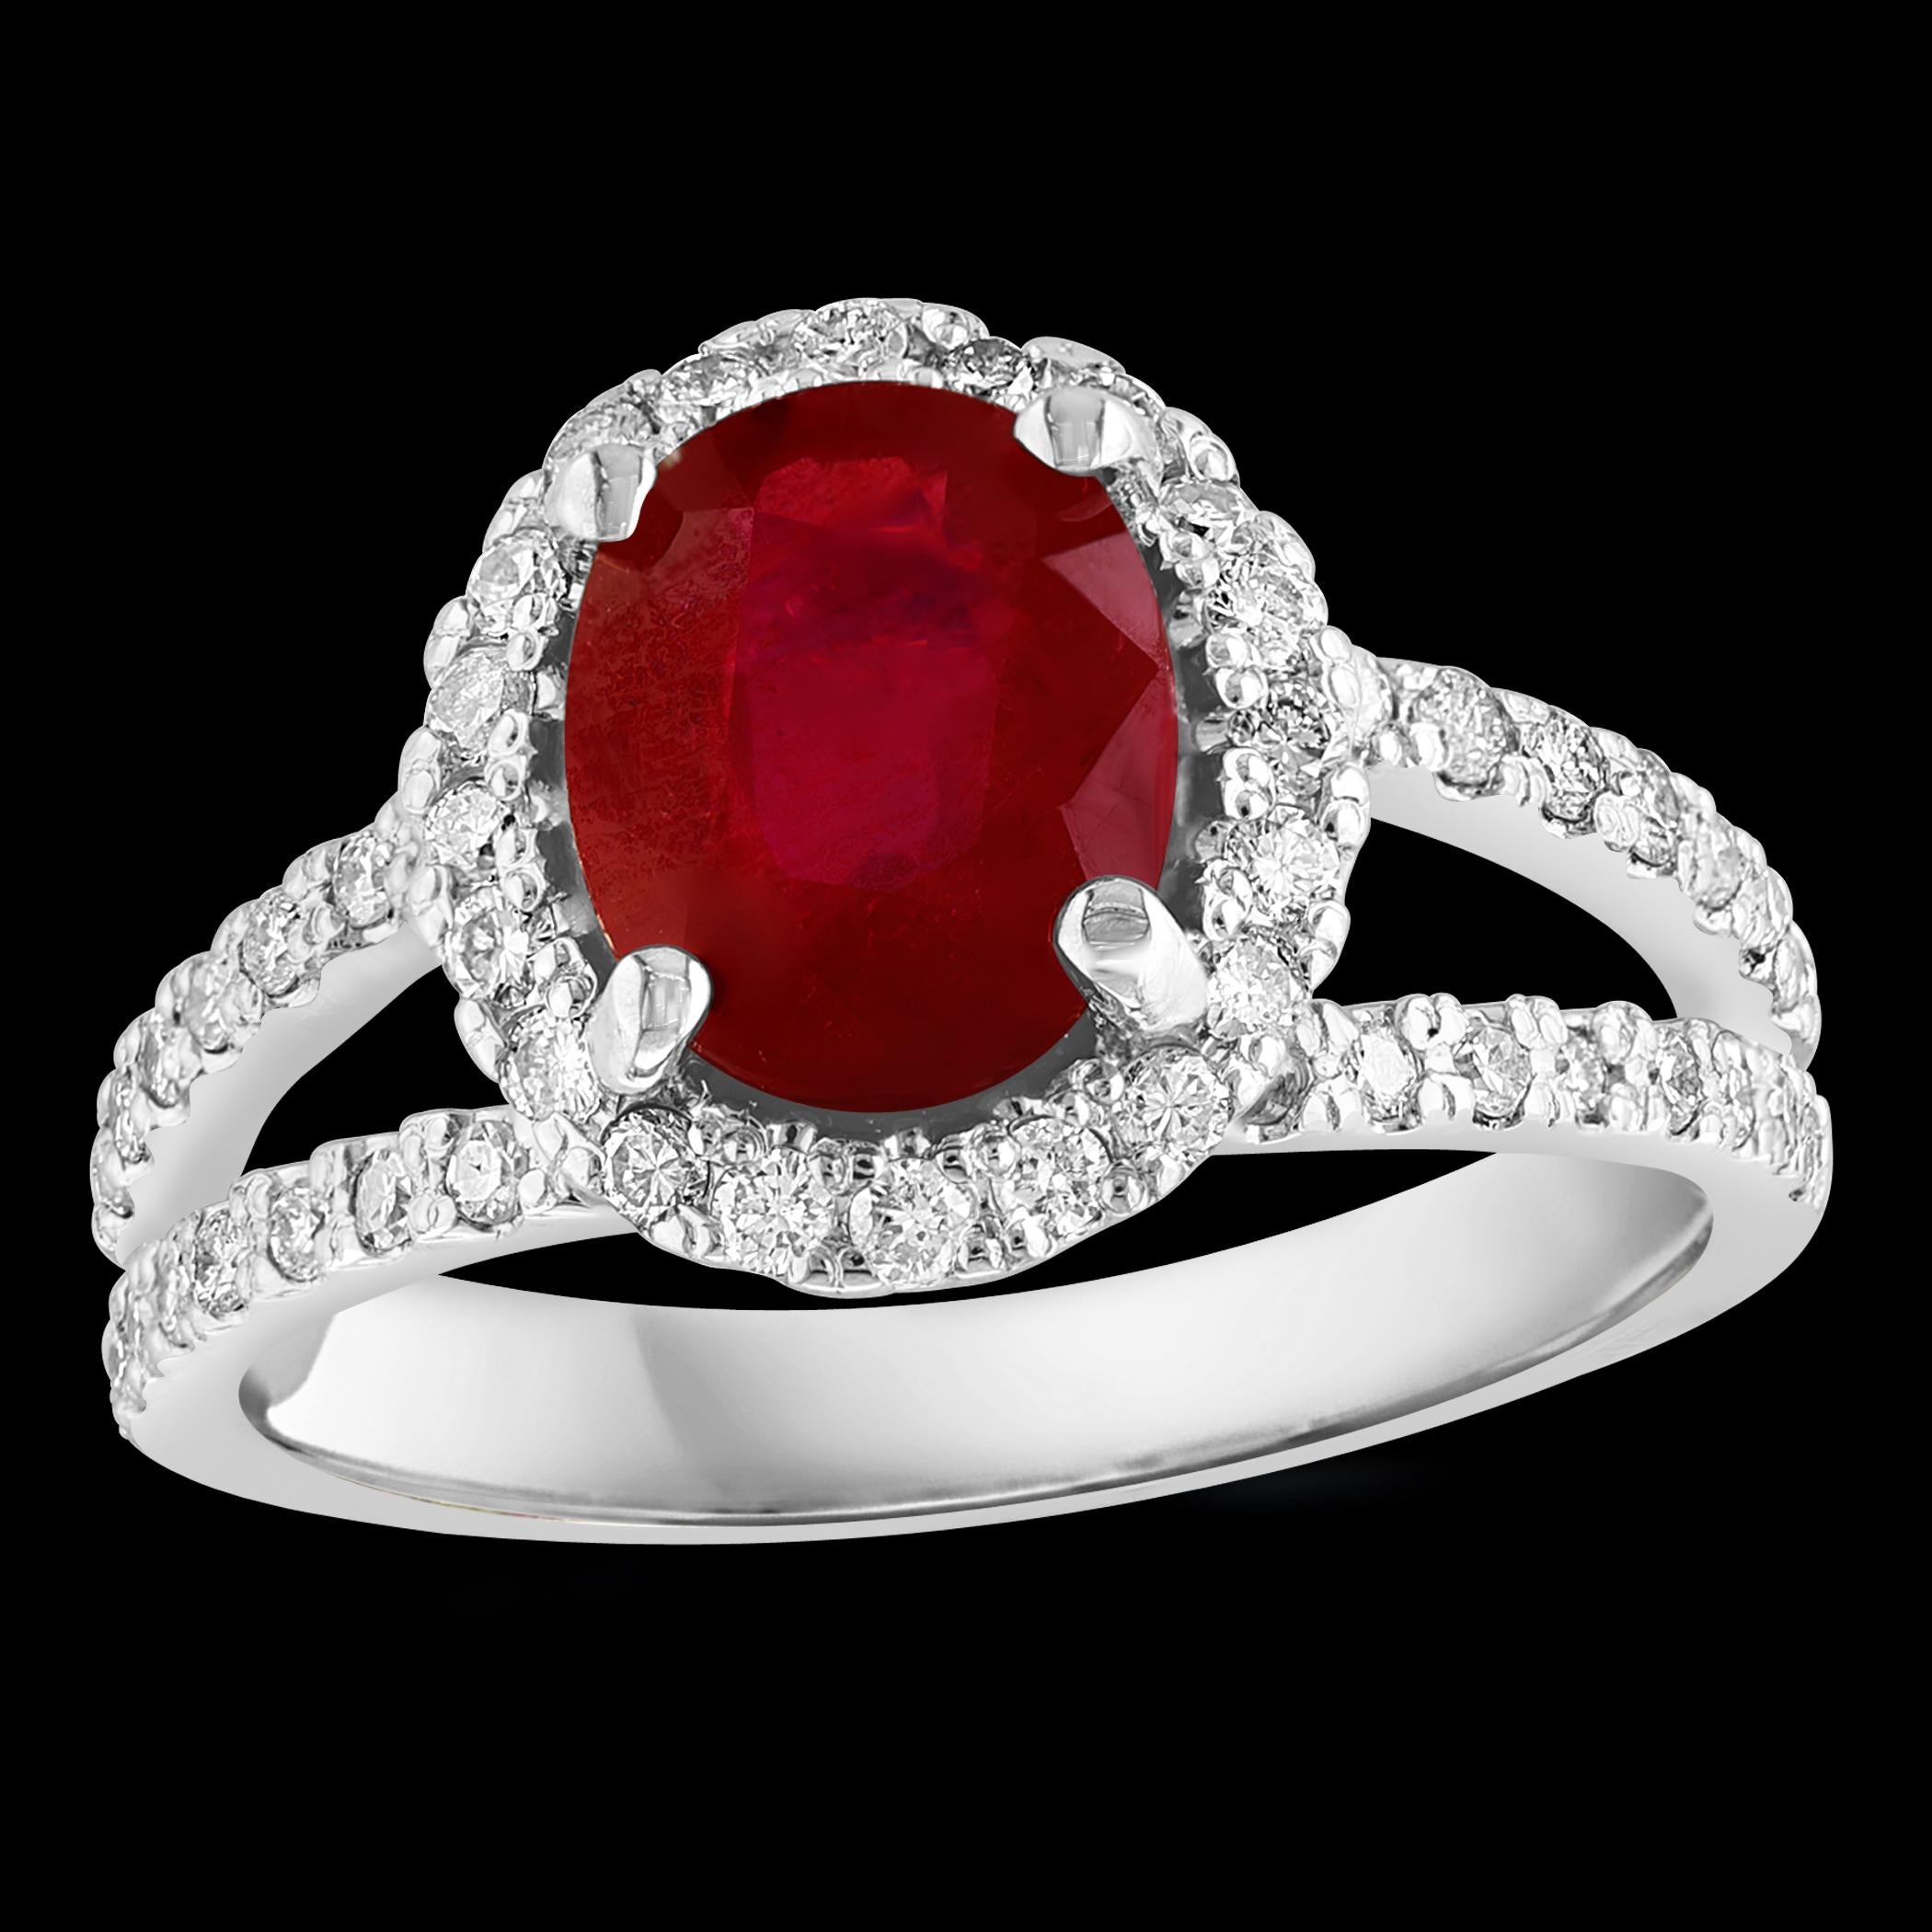 2.5 Carat Oval Treated Ruby & 2 ct Diamond Ring 14 Karat White Gold Size 7.25 For Sale 6